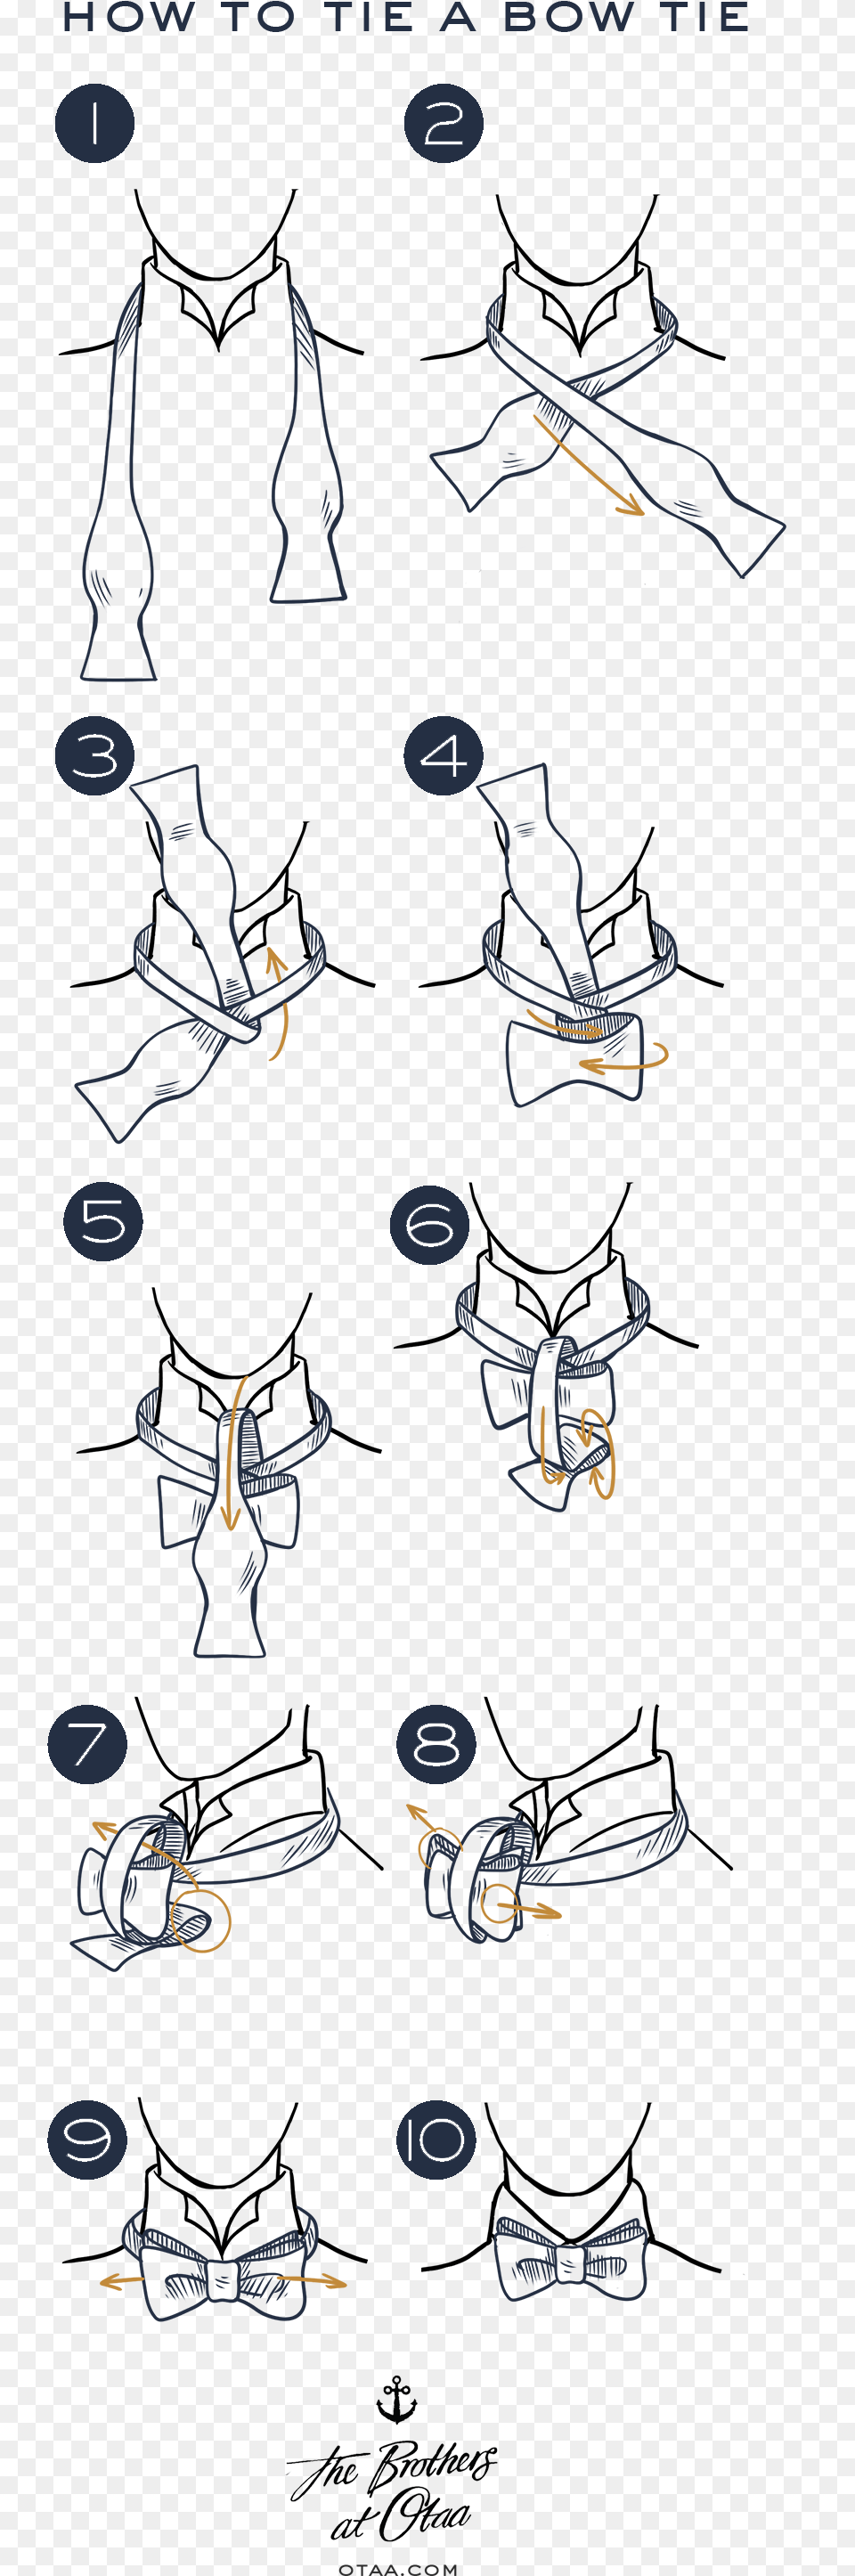 How To Tie A Bow Tie Cartoon Png